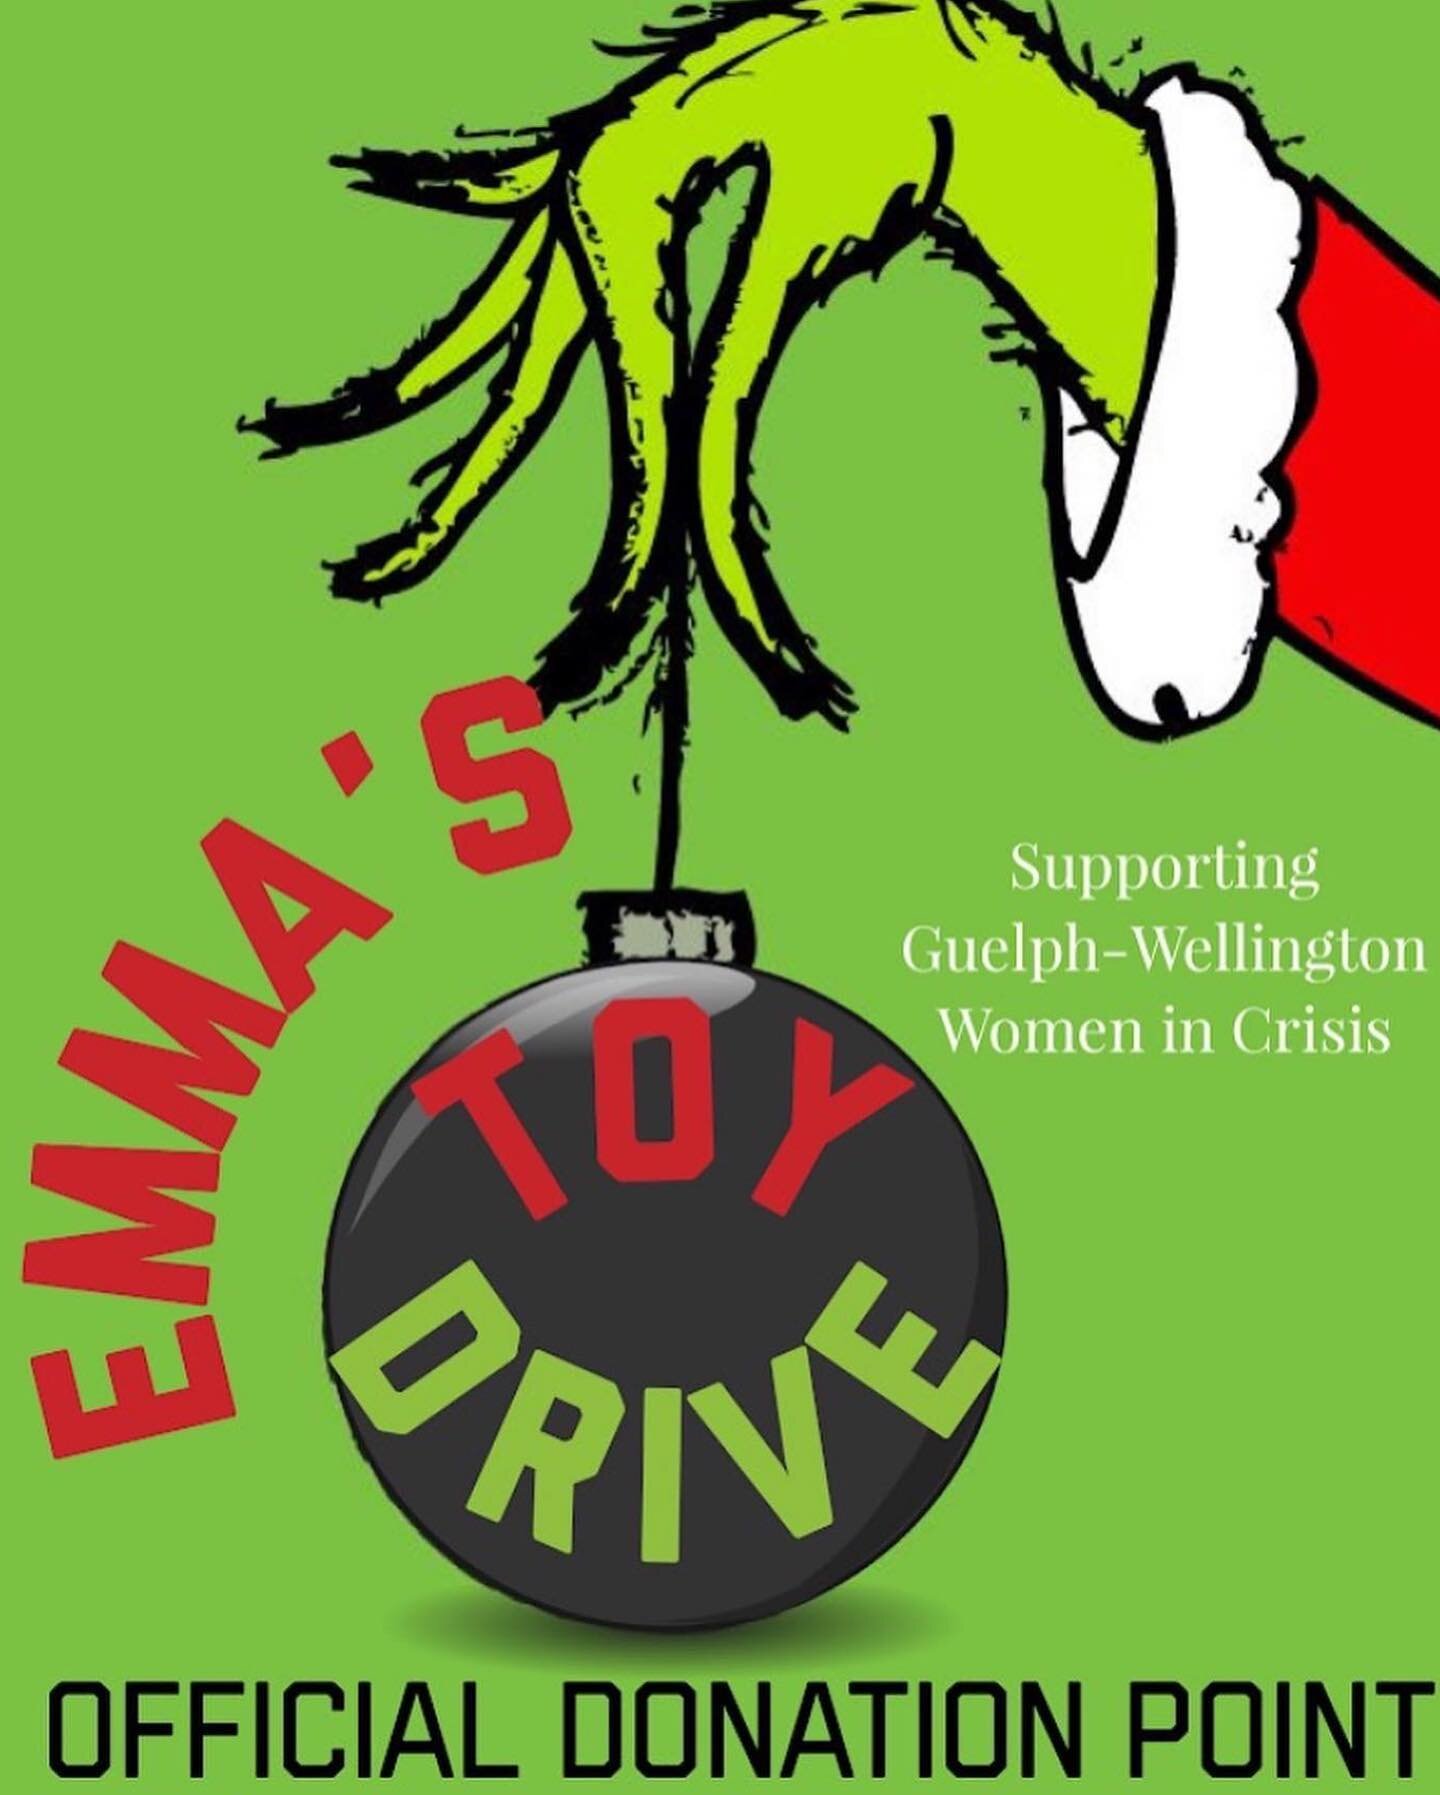 PLEASE SHARE❤️
We are proud to be an official donation point for Emma&rsquo;s Toy Drive which supports Guelph-Wellington Women in Crisis.

Until December 18th drop off an unwrapped toy or gift item for a teen. Swipe left to see the list of items and 